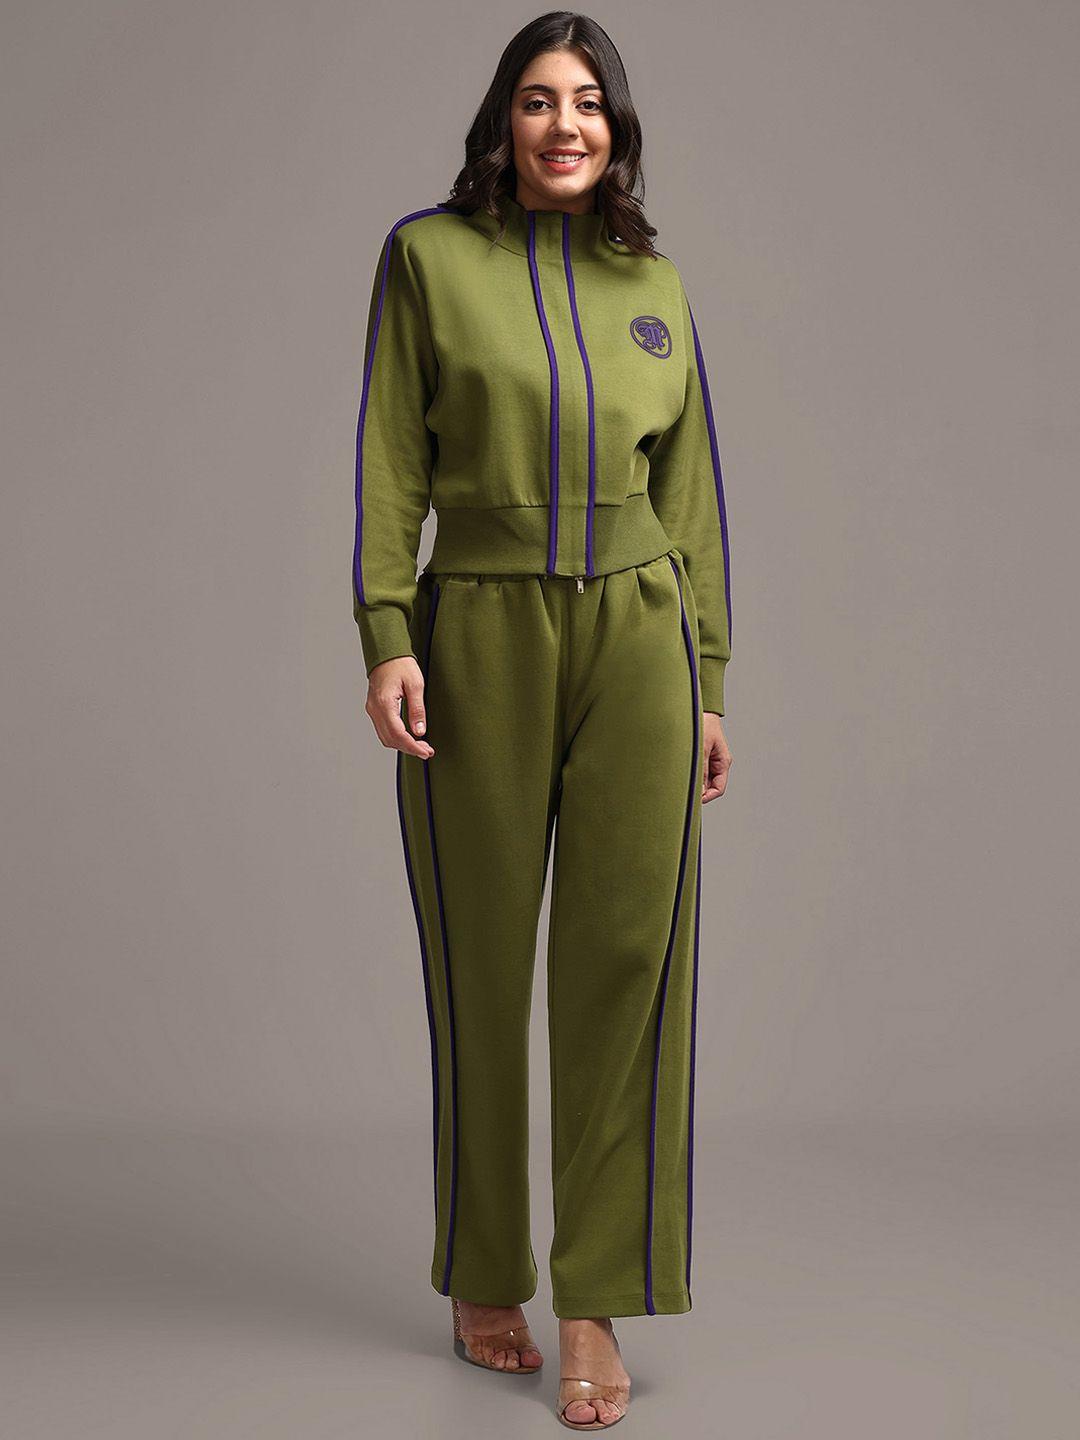 iki chic olive green high neck sweatshirt with trousers